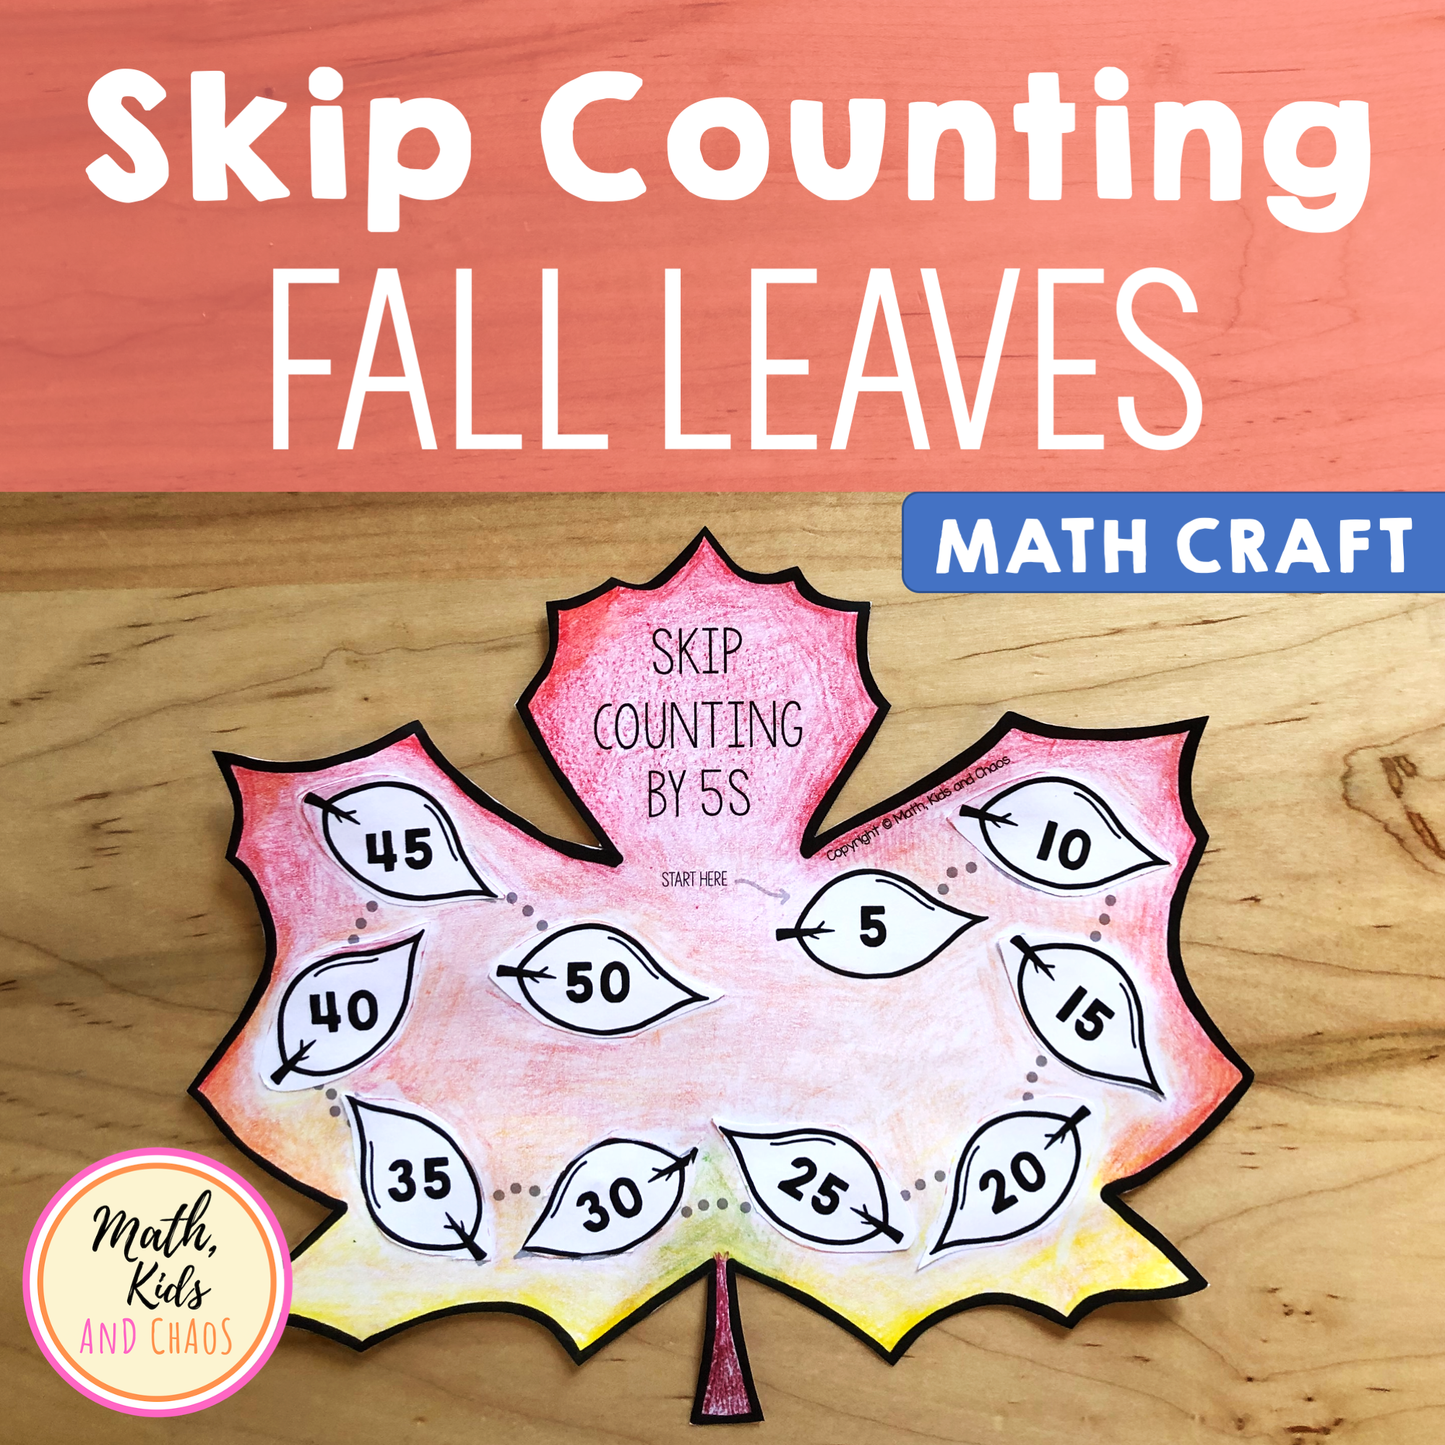 Skip Counting Fall Leaves (math craft)